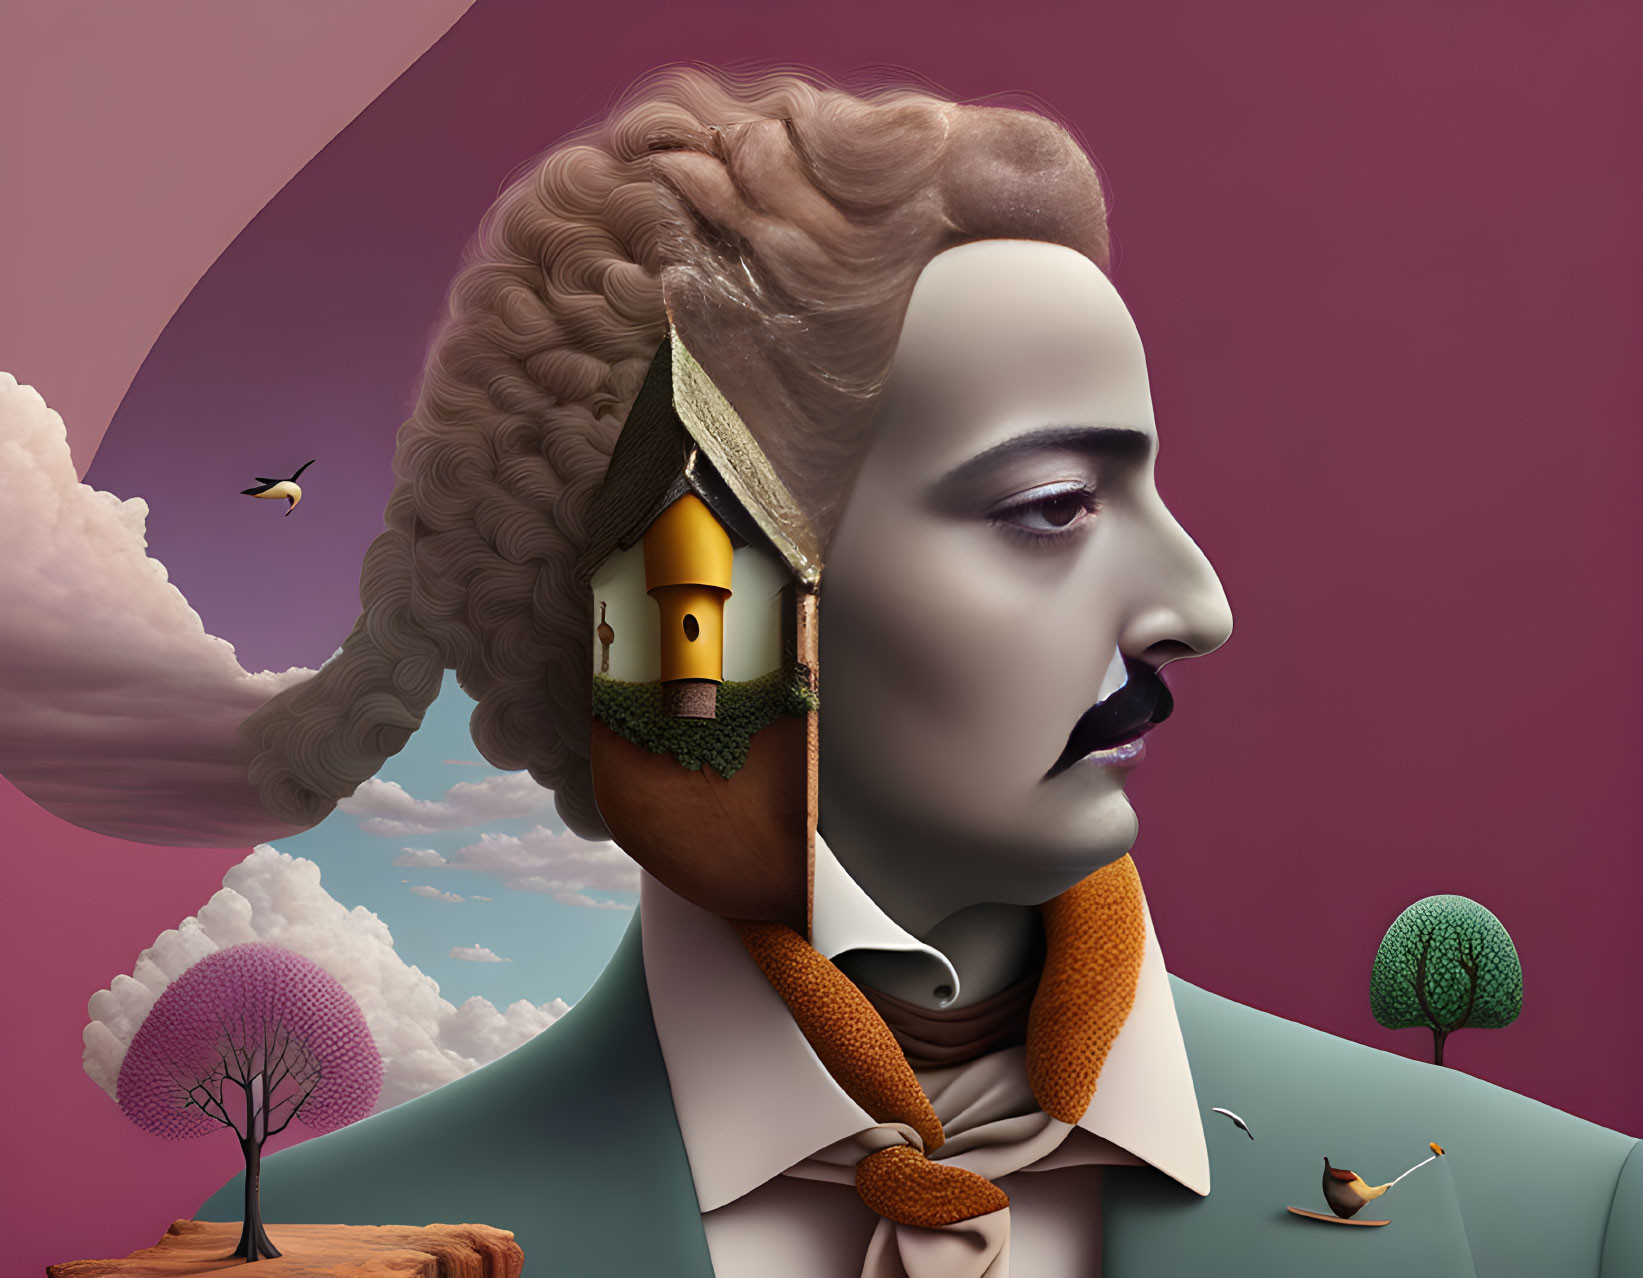 Surreal portrait blending man's profile with countryside scene